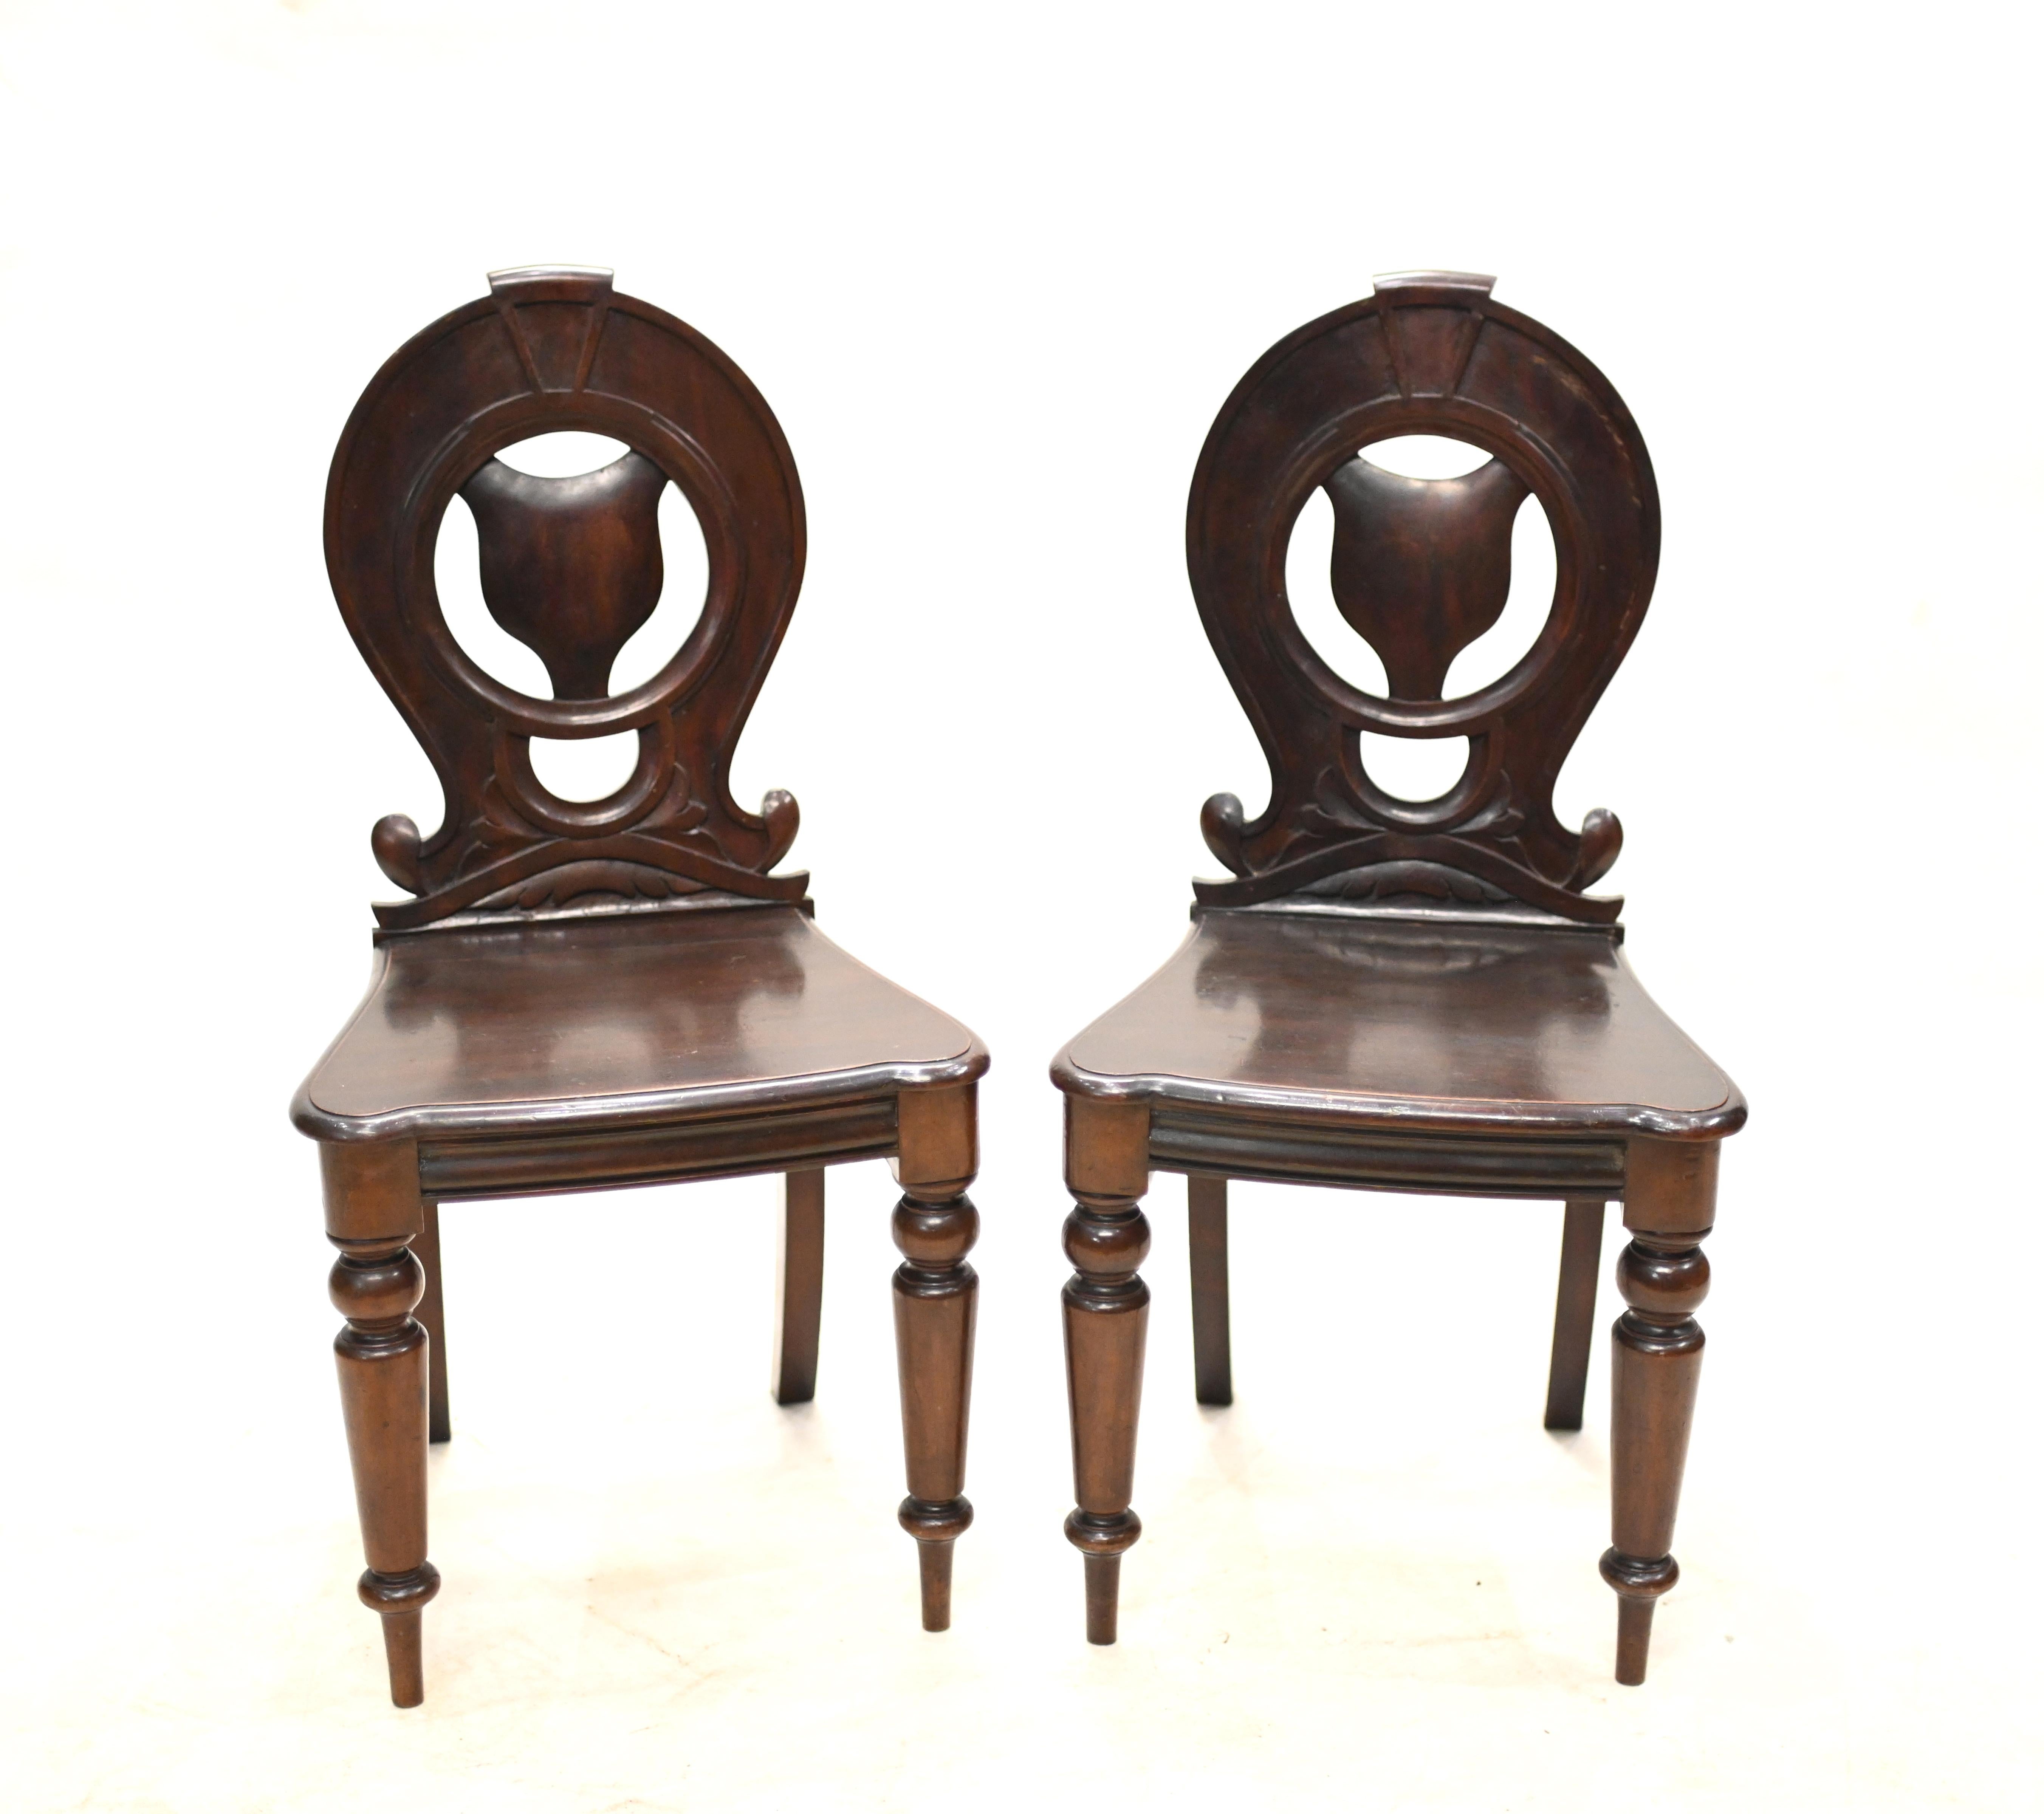 Elegant pair of Victorian hall chairs in mahogany
Circa 1840 on this refined pair of chairs
Great design and would work well as accent chairs
Bought from a private residence in London's Bloomsbury
Offered in great shape and will ship to anywhere in